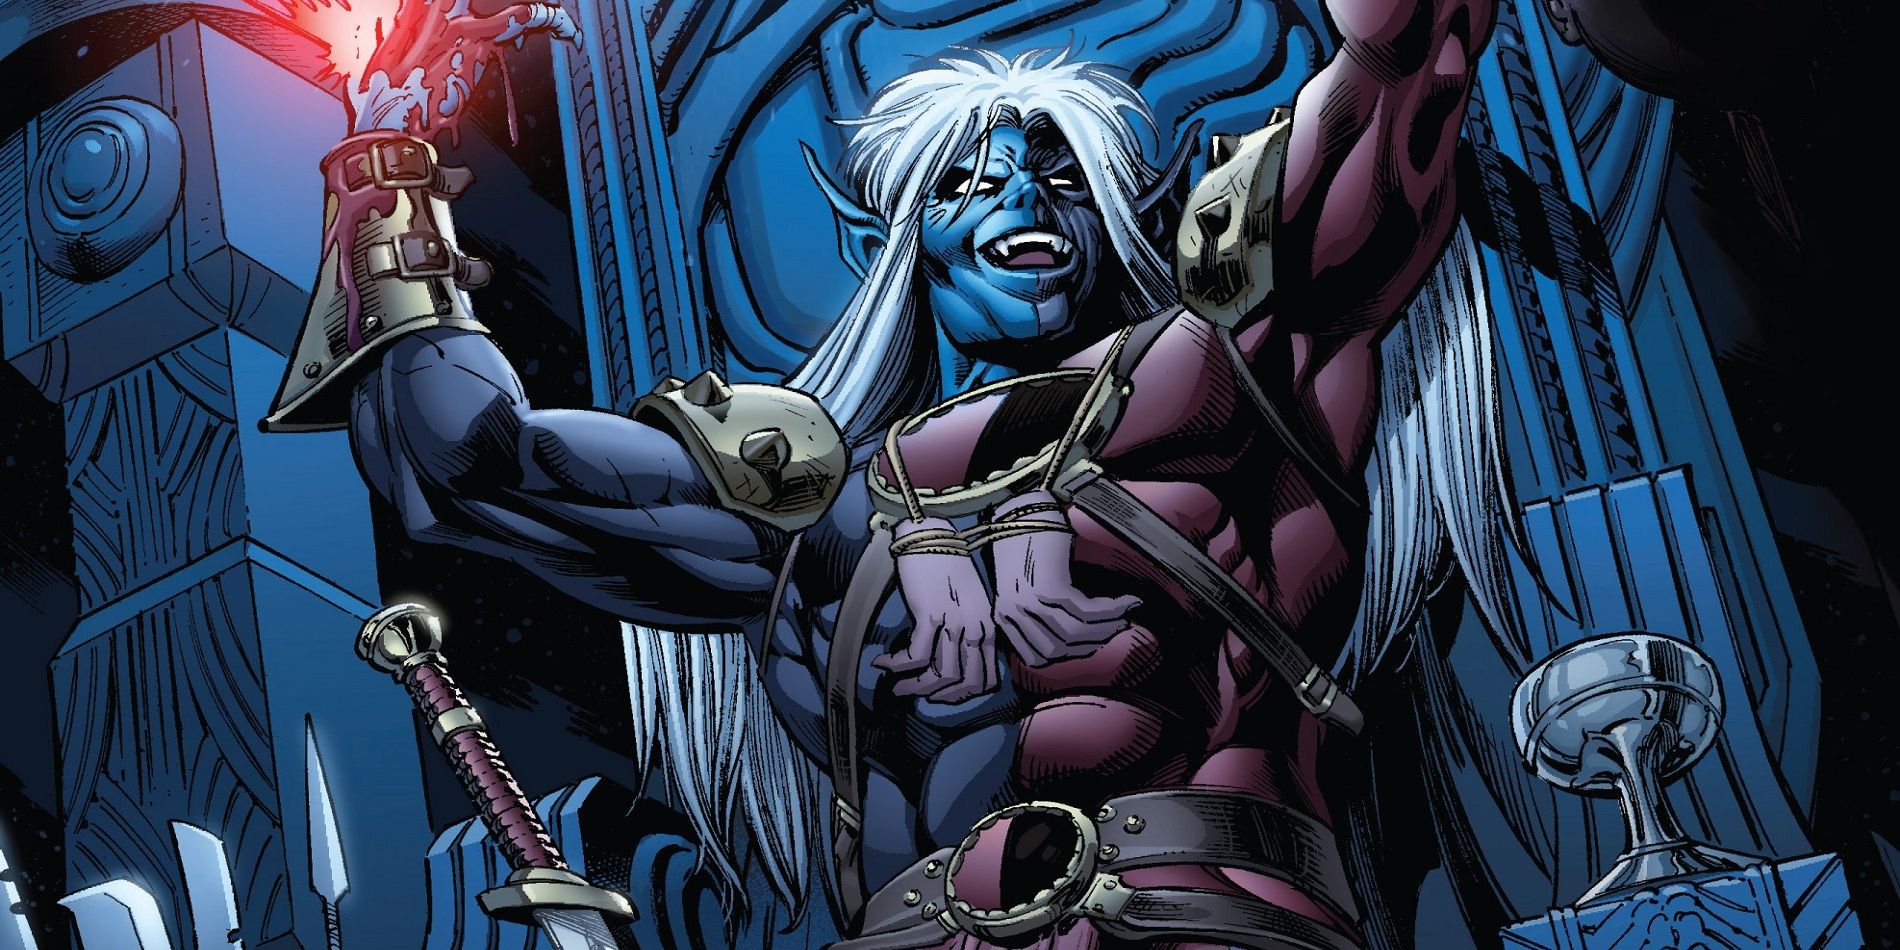 Malekith the Accursed from Thor's Marvel Comics.